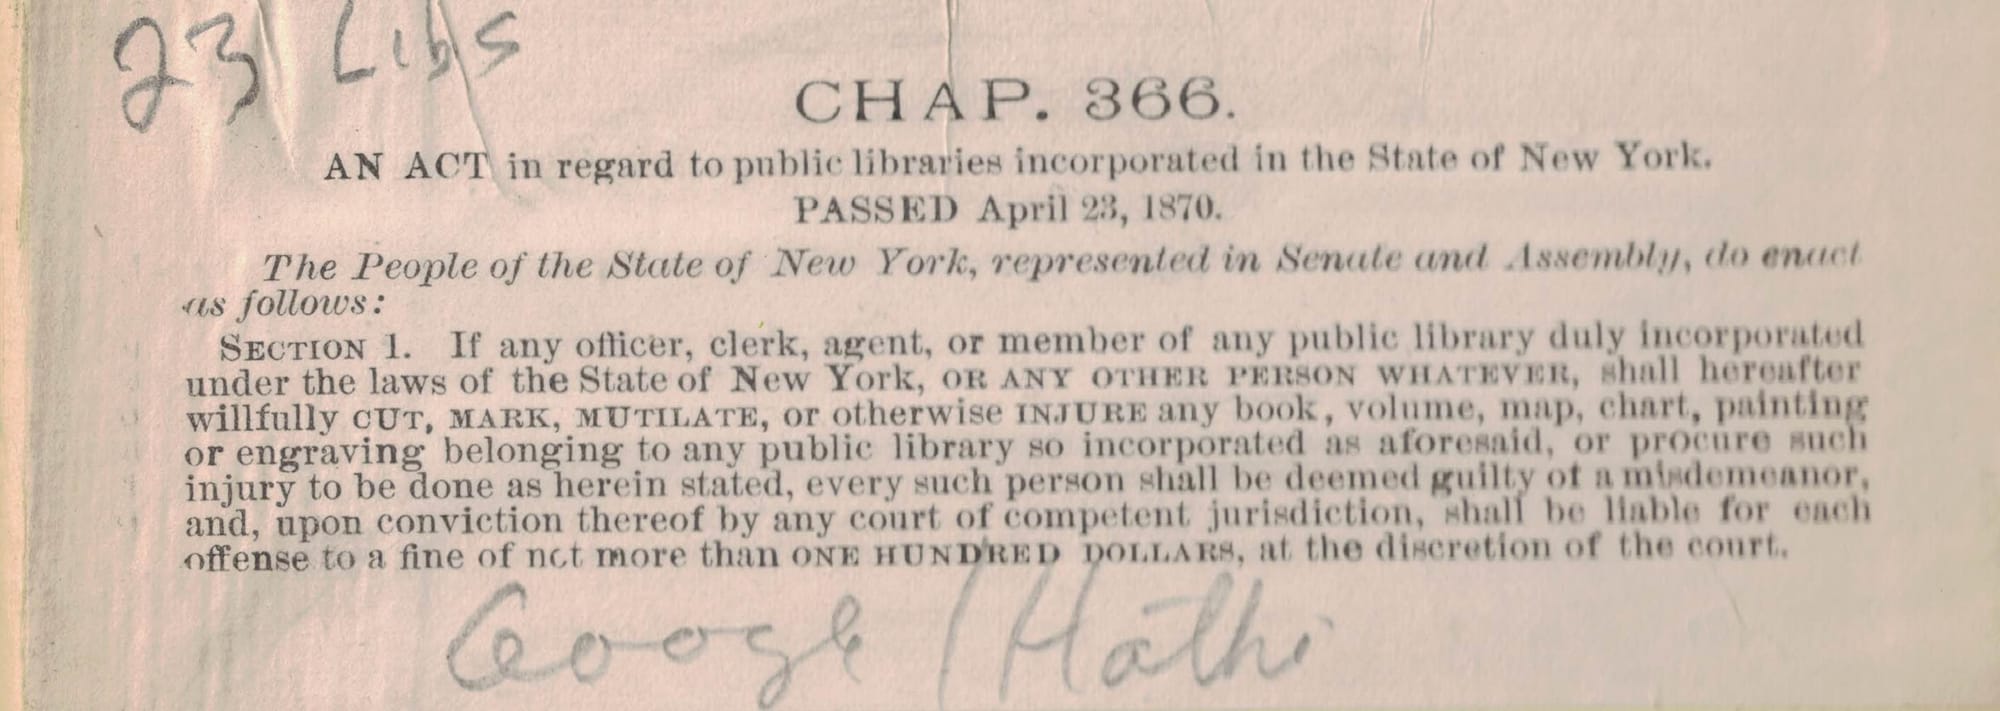 An Act in regard to public libraries incorporated in the State of New York. PASSED April 23, 1870.